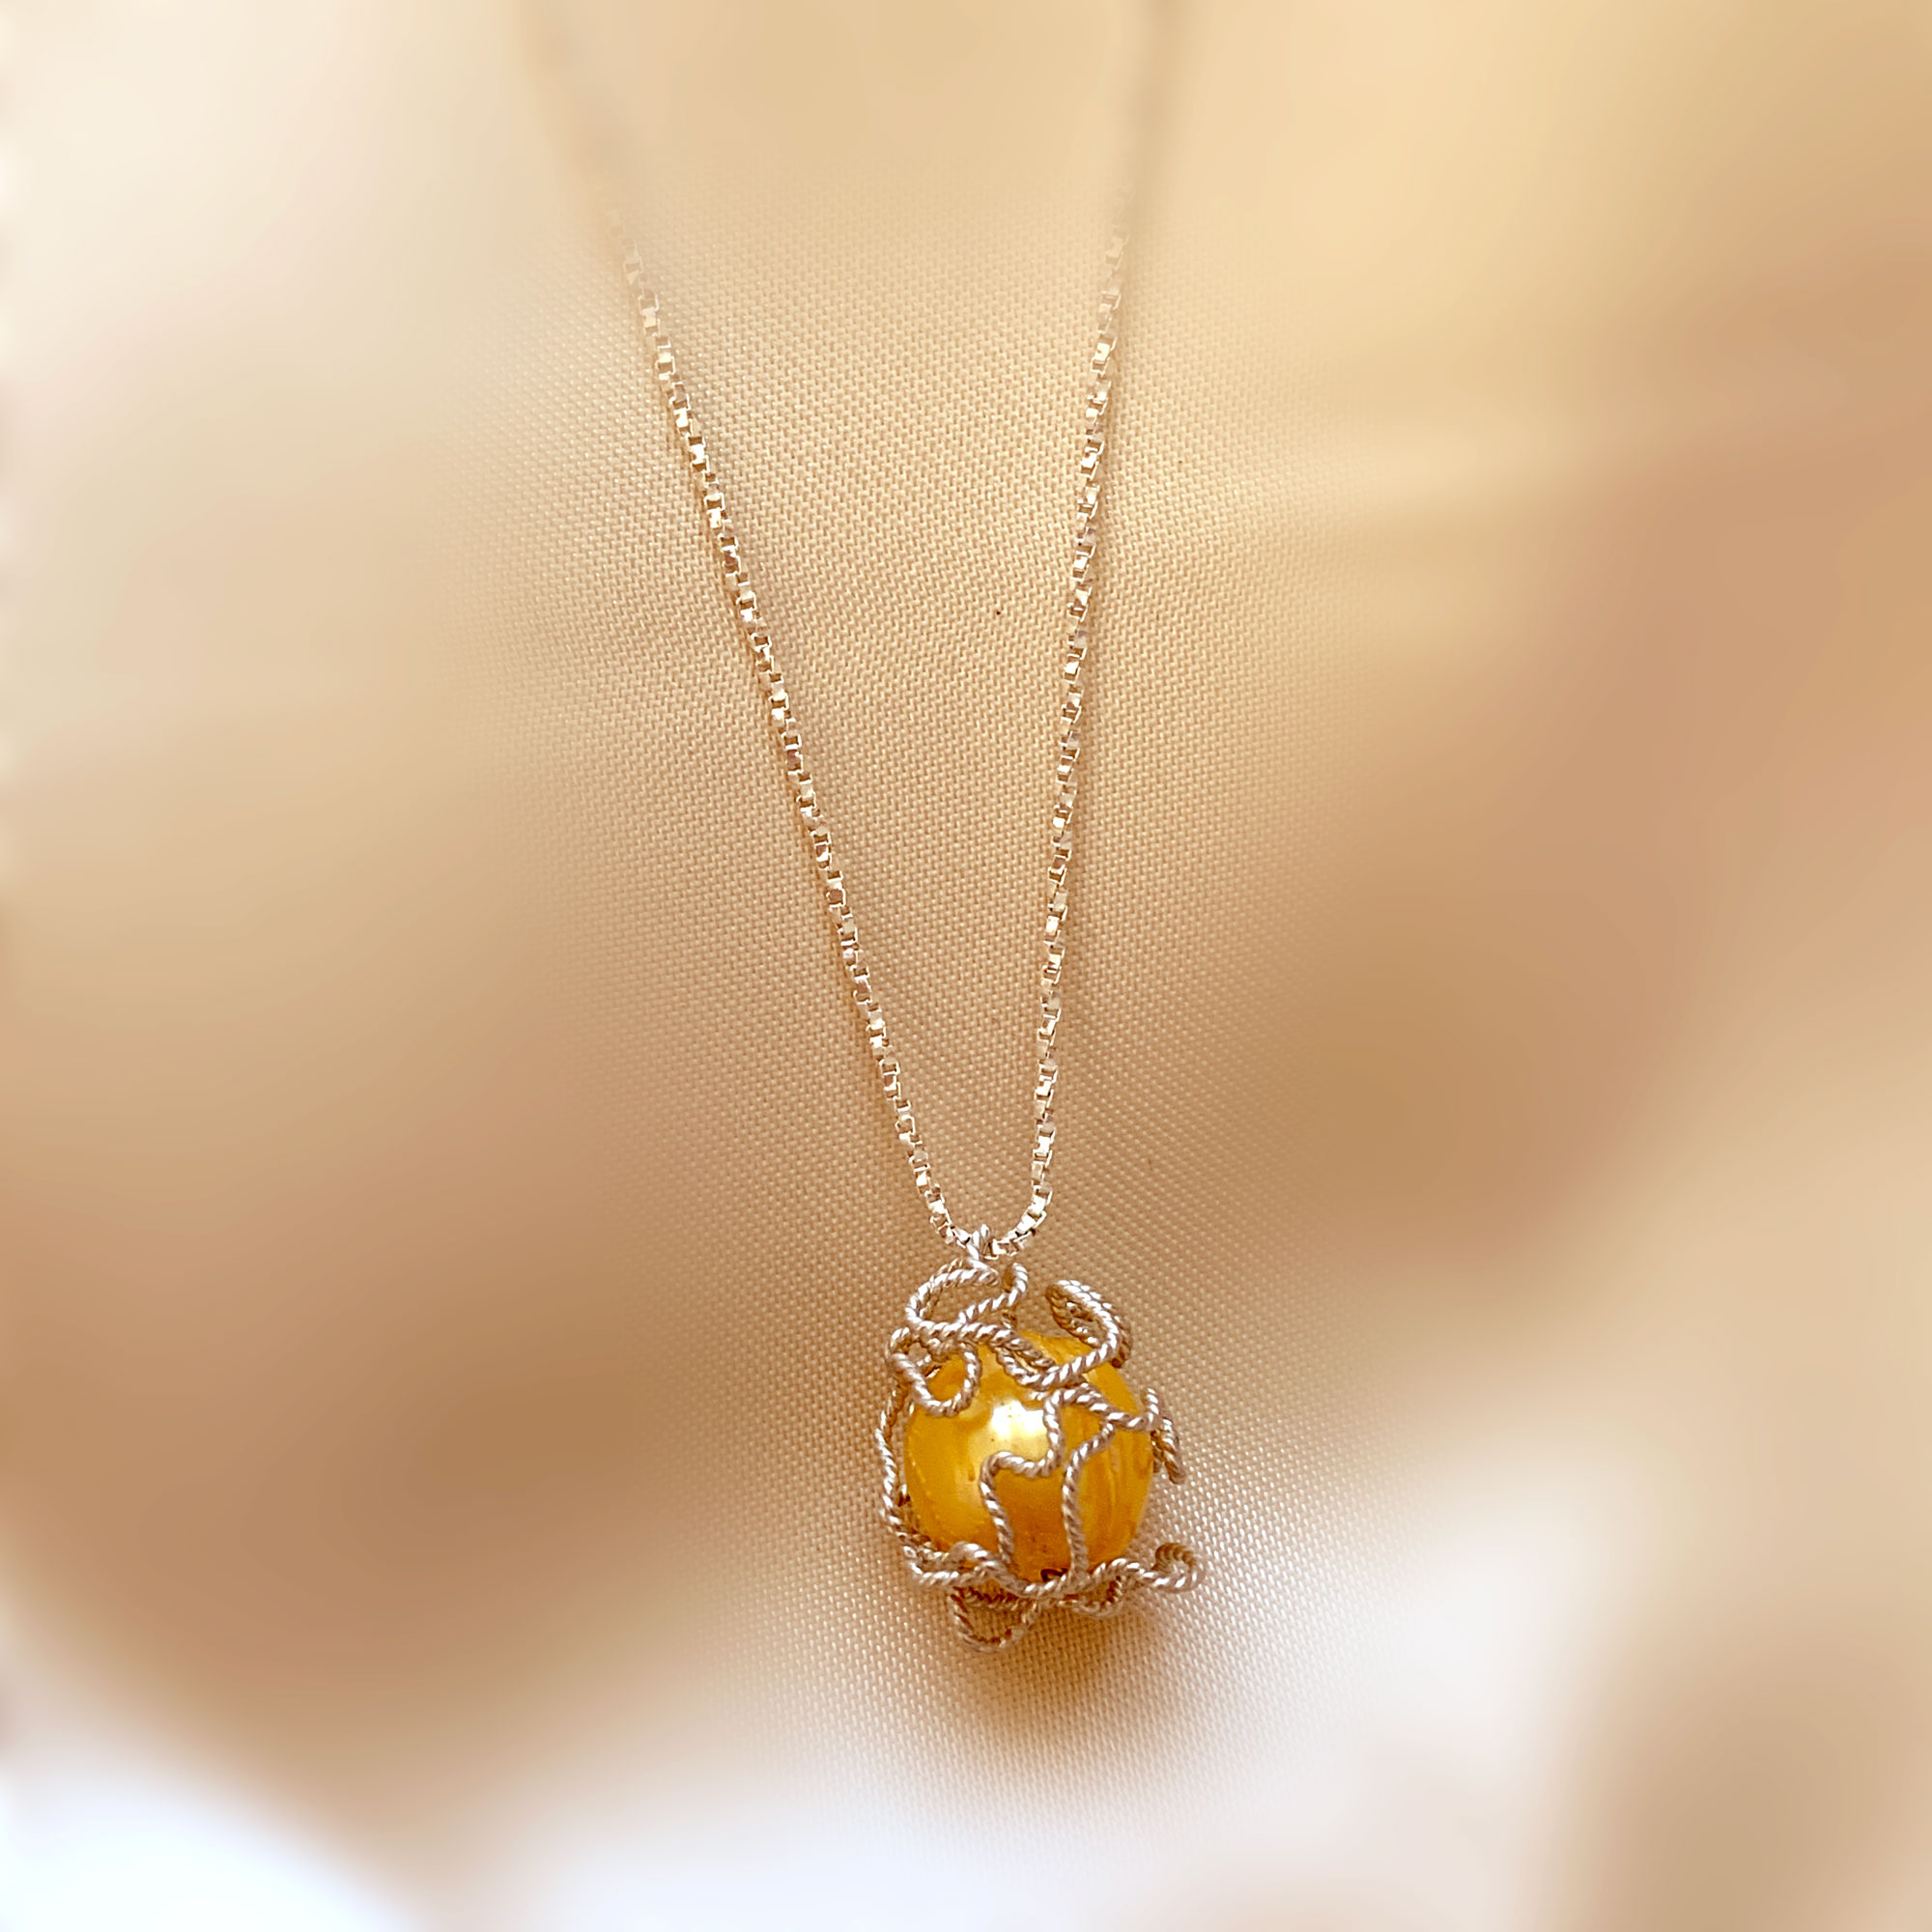 'Golden Touch' Pendant Silver Chain Necklace